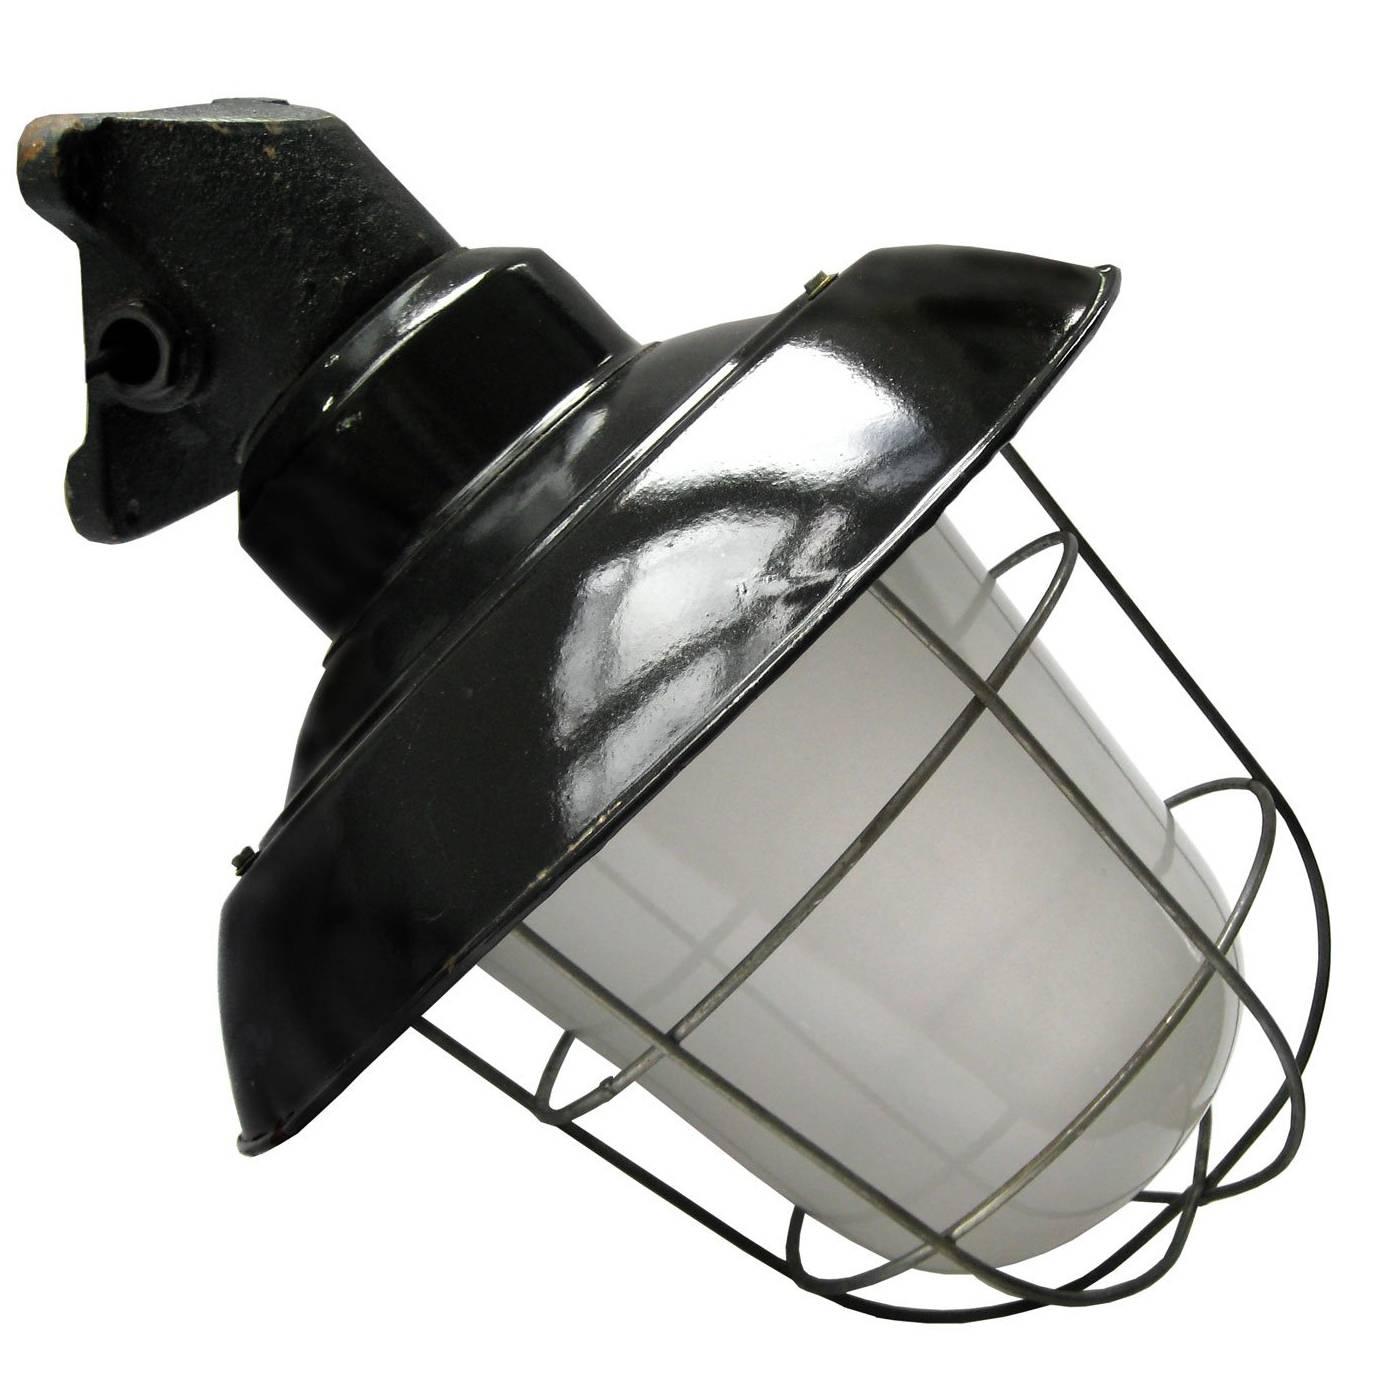 Industrial wall lamp. Cast iron arm. Black enamel shade. White interior. Frosted glass.

Weight: 5.0 kg / 11 lb

Priced per individual item. All lamps have been made suitable by international standards for incandescent light bulbs, energy-efficient